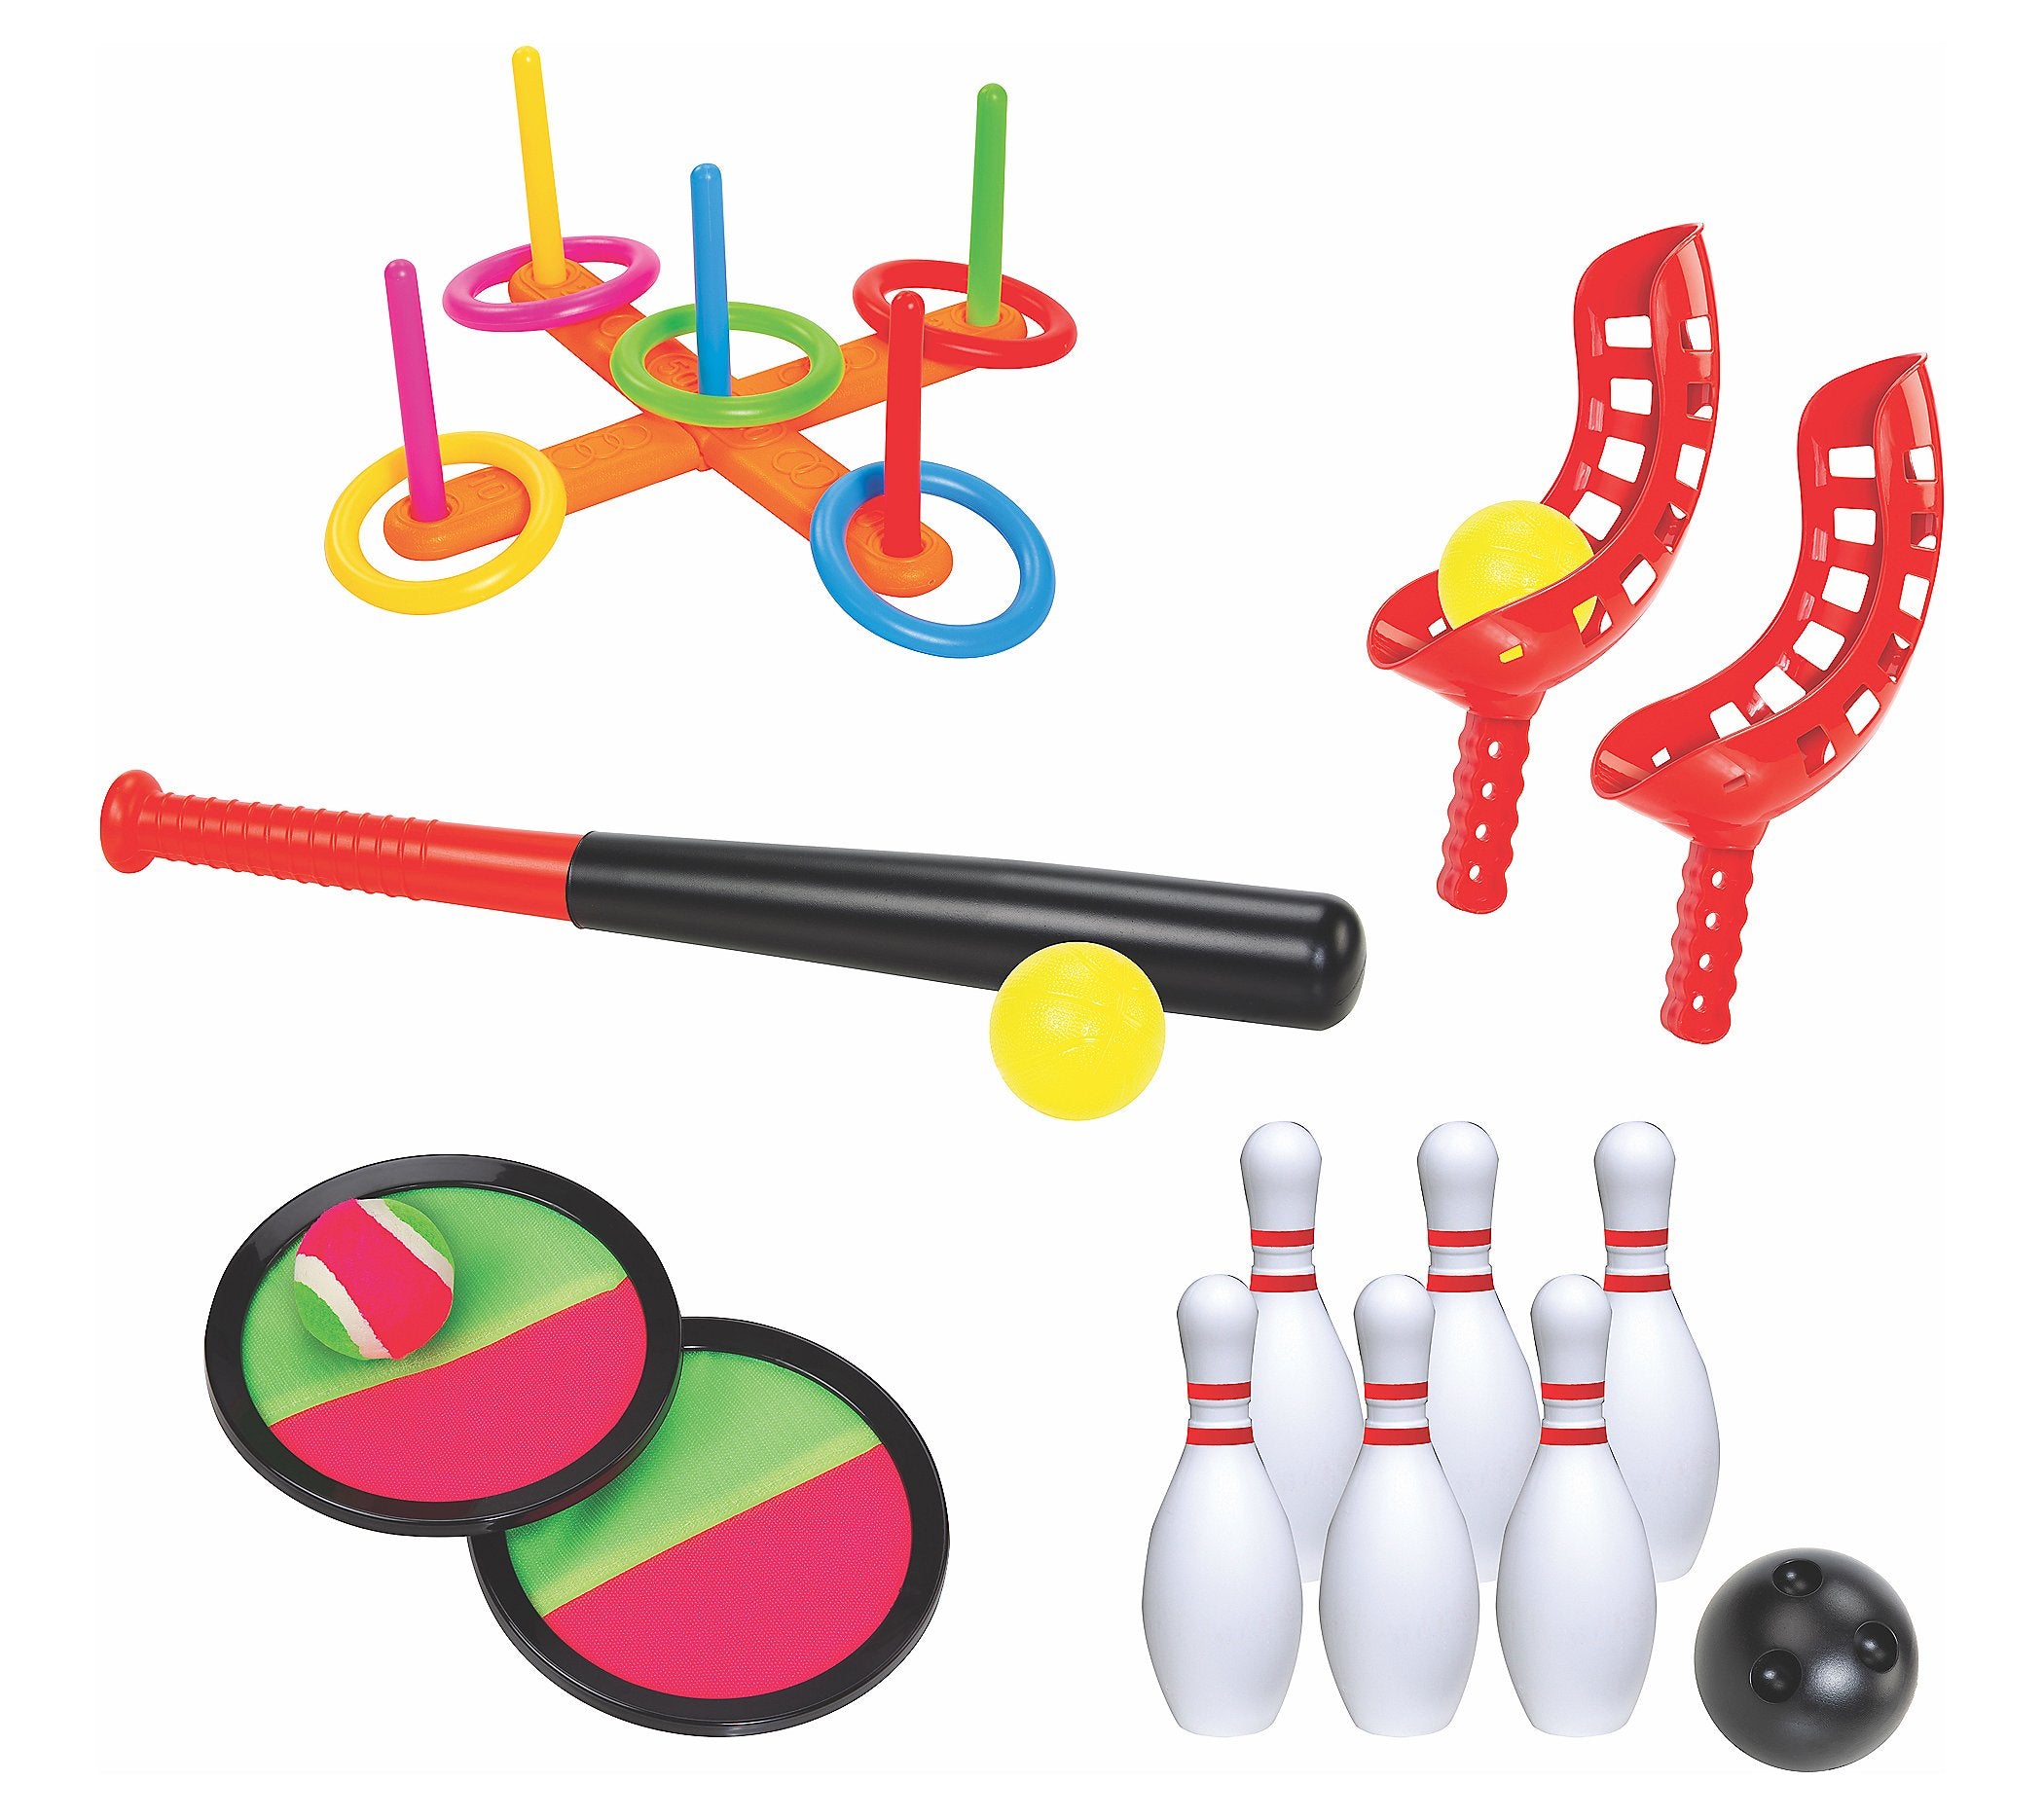 ETNA TOYS - 5-in-1 Sports Set, Family Games, Outdoor Yard Games, Beach Games, Jr. Sports